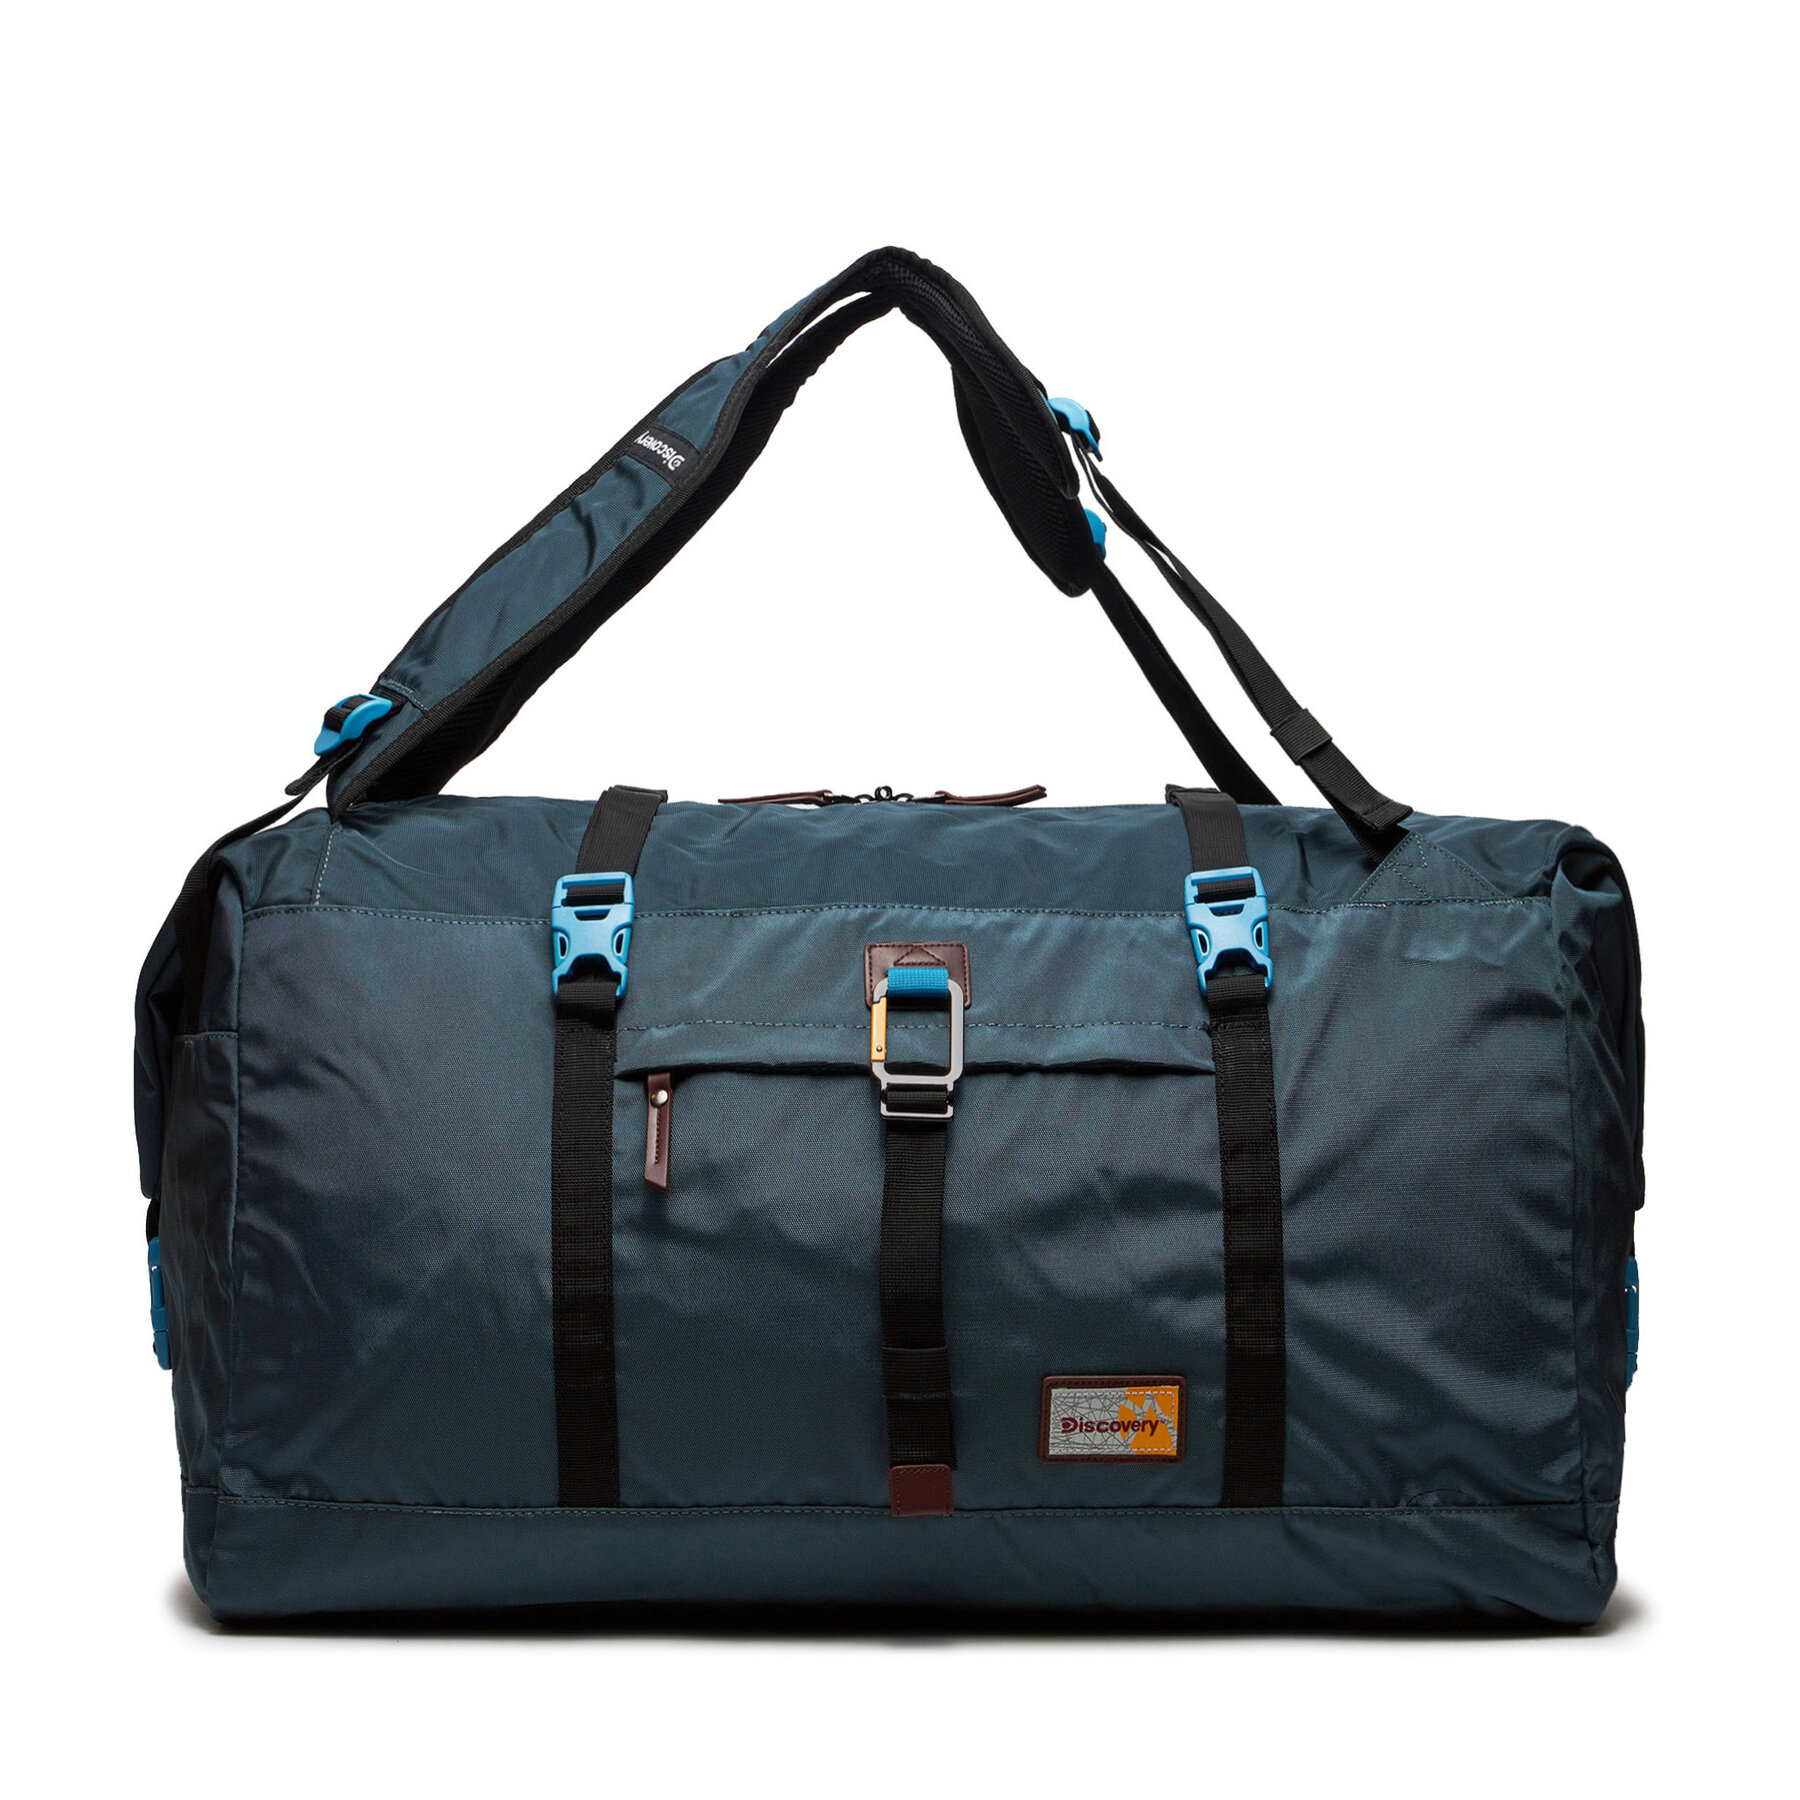 Tasche Discovery Duffel Bag D00731.40 Steel Blue von Discovery